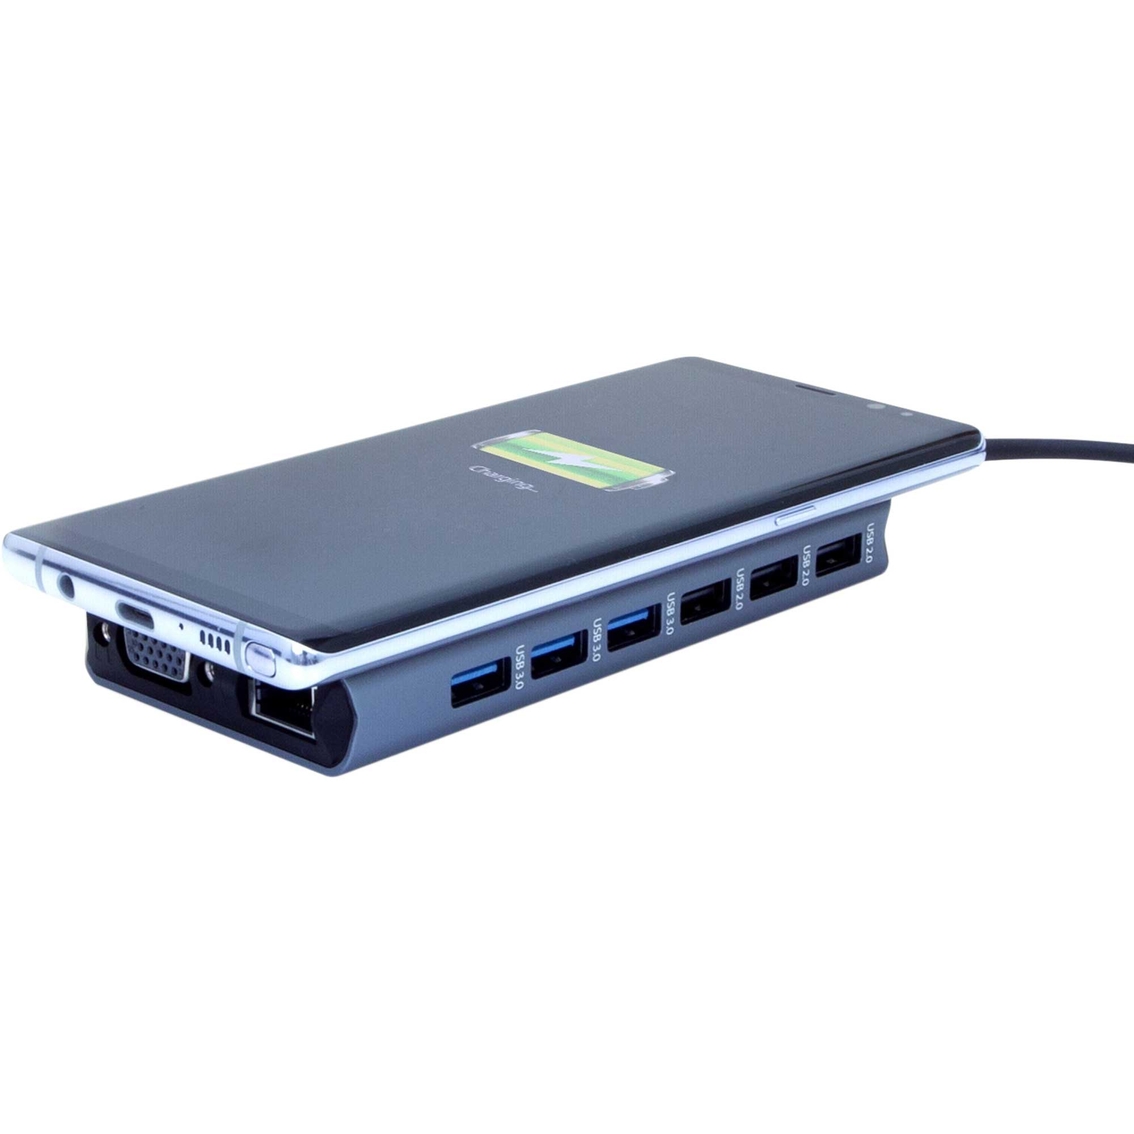 Helix 15 in 1 USB-C Hub with Wireless Charging - Image 4 of 5